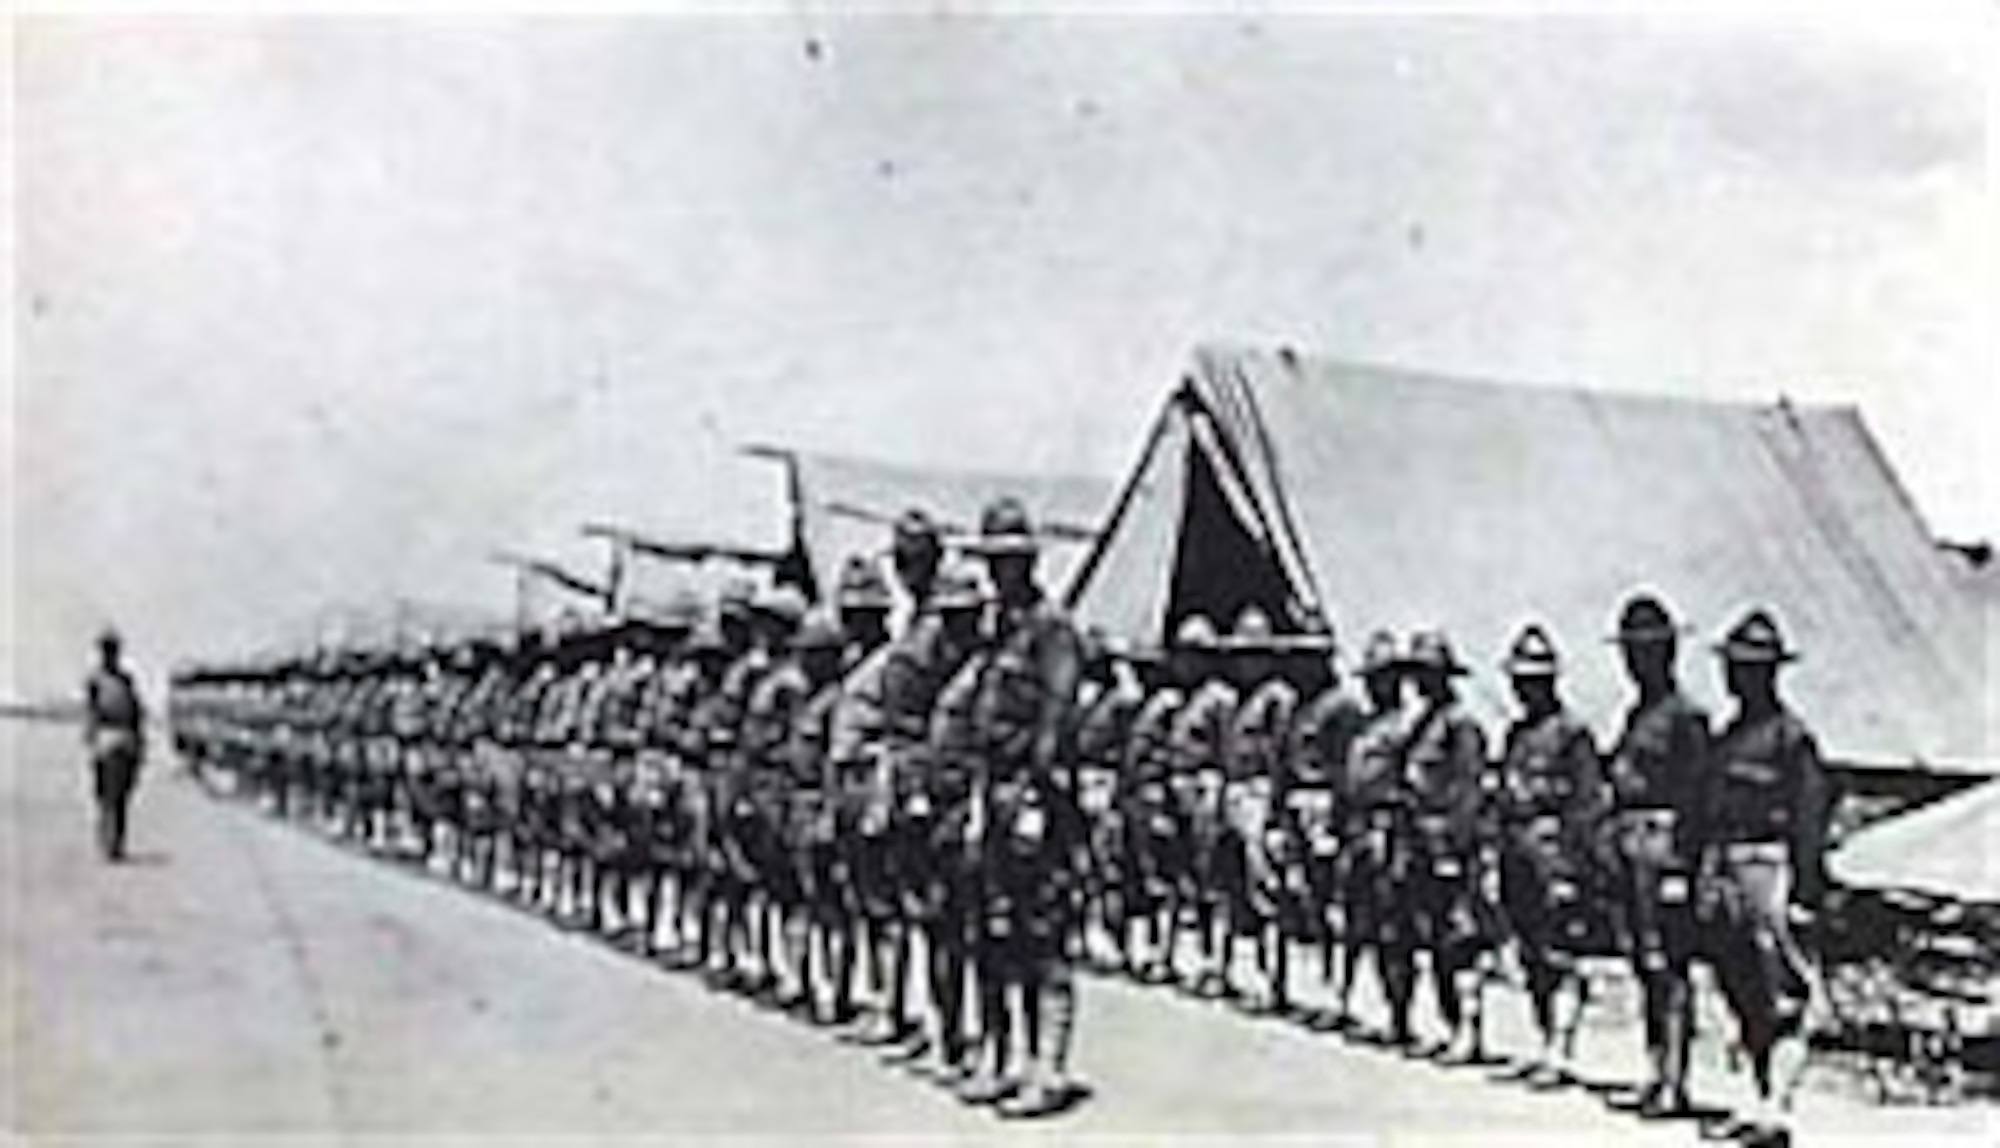 Troop formation at Kelly Field, Texas, in September 1917. (U.S. Air Force photo)